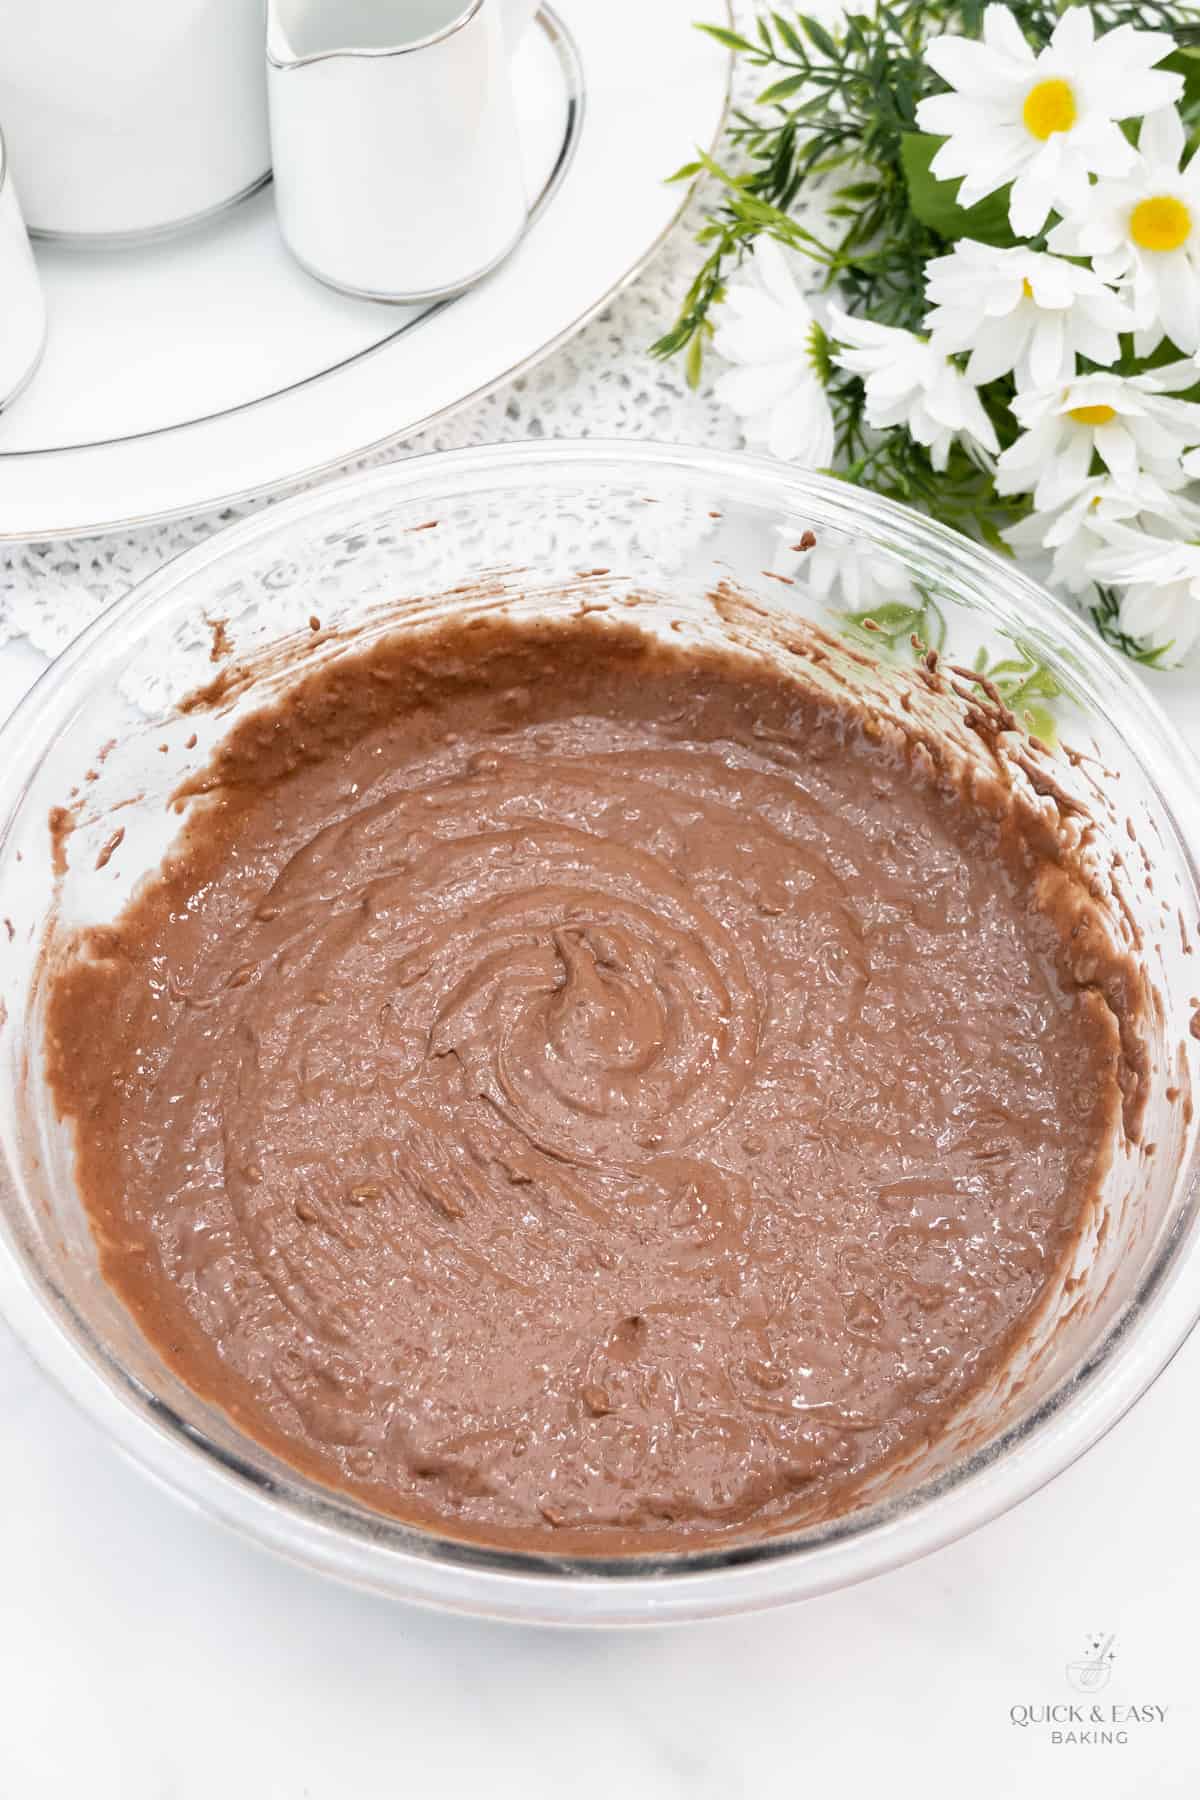 Mixed chocolate banana bread batter in a glass bowl.